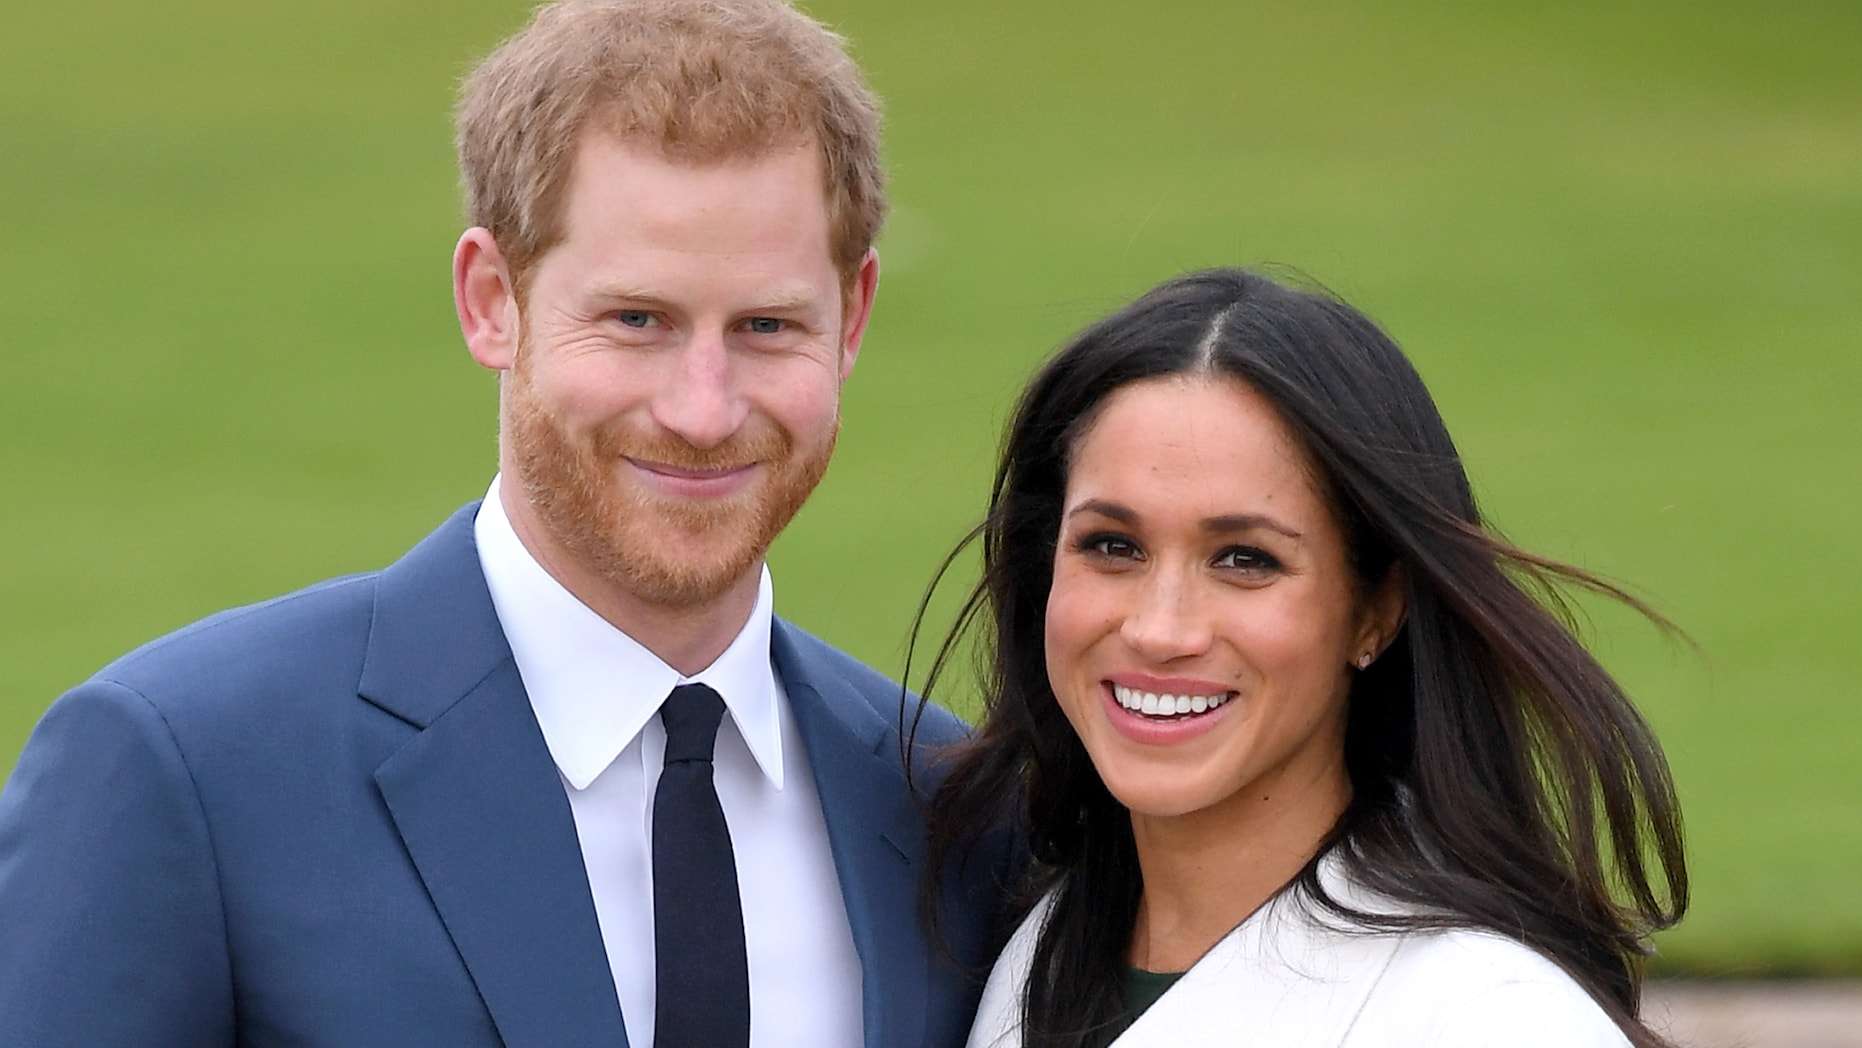 Prince Harry and Meghan, the Duchess of Sussex, open up in Oprah interview